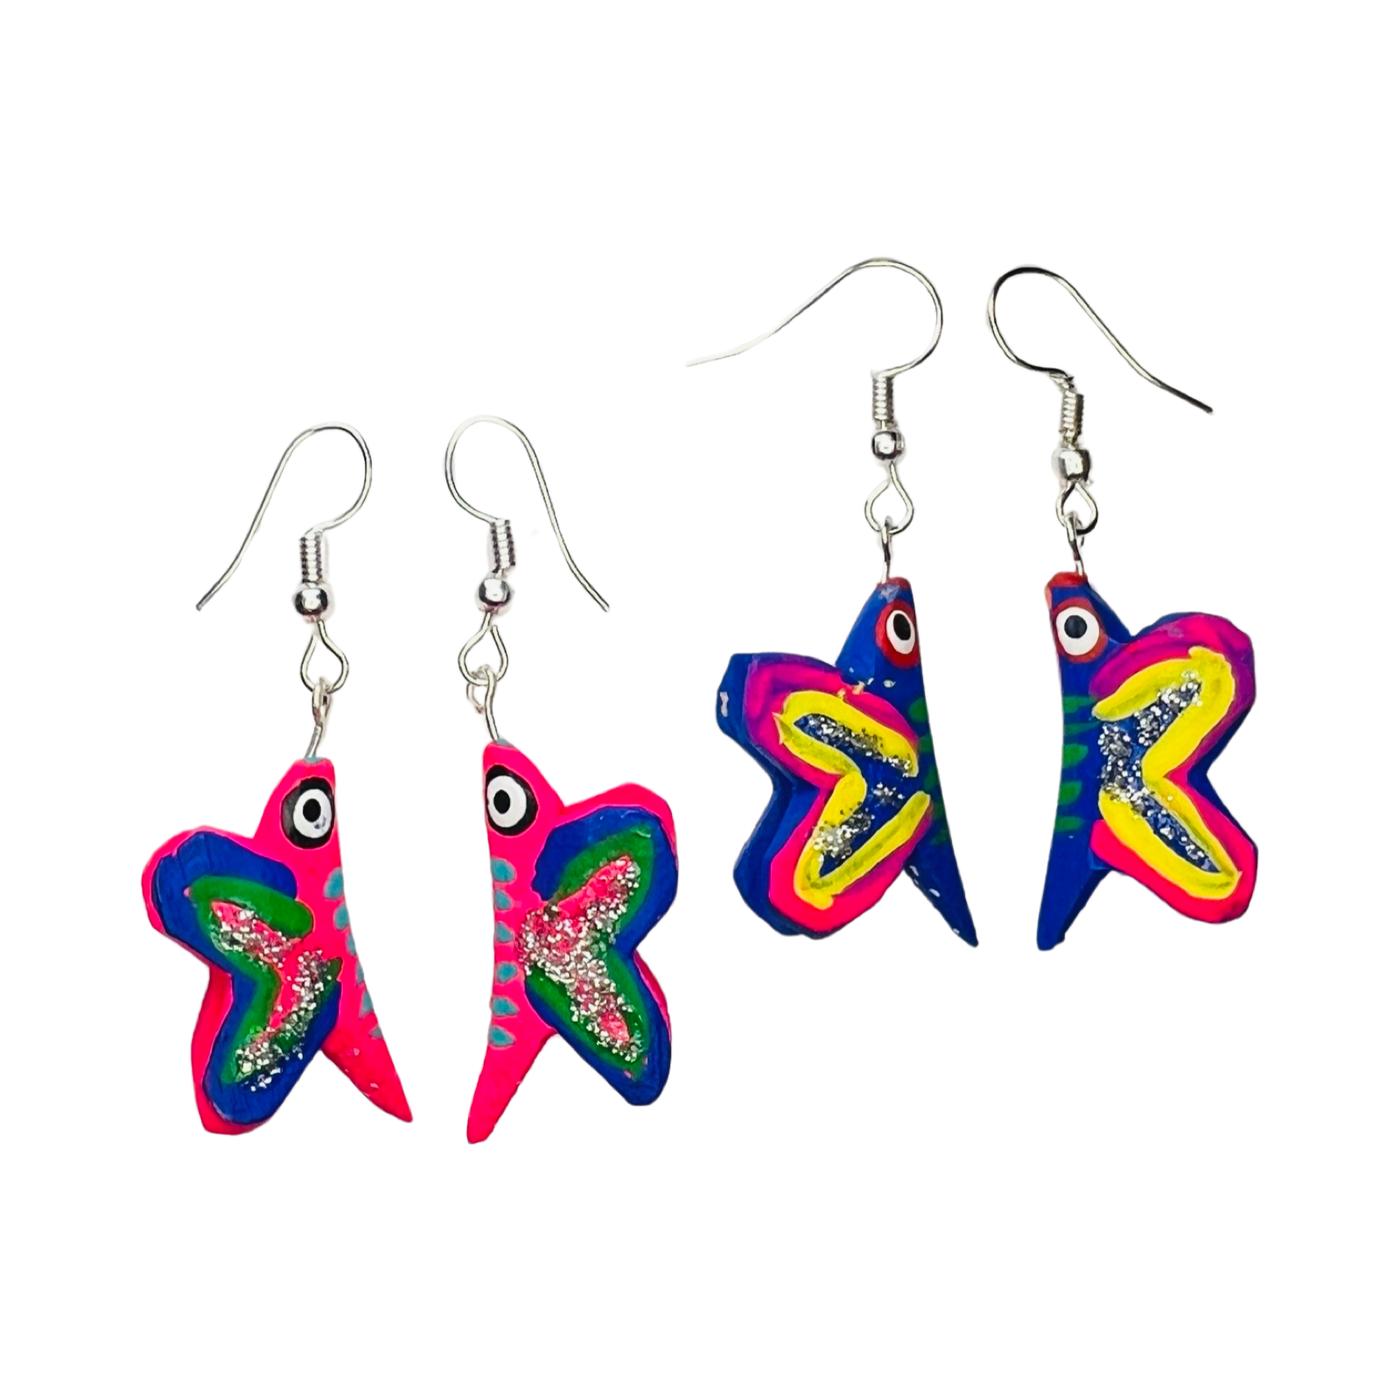 2 sets of handpainted colorful butterfly earrings featuring a bit of glitter on the wings.